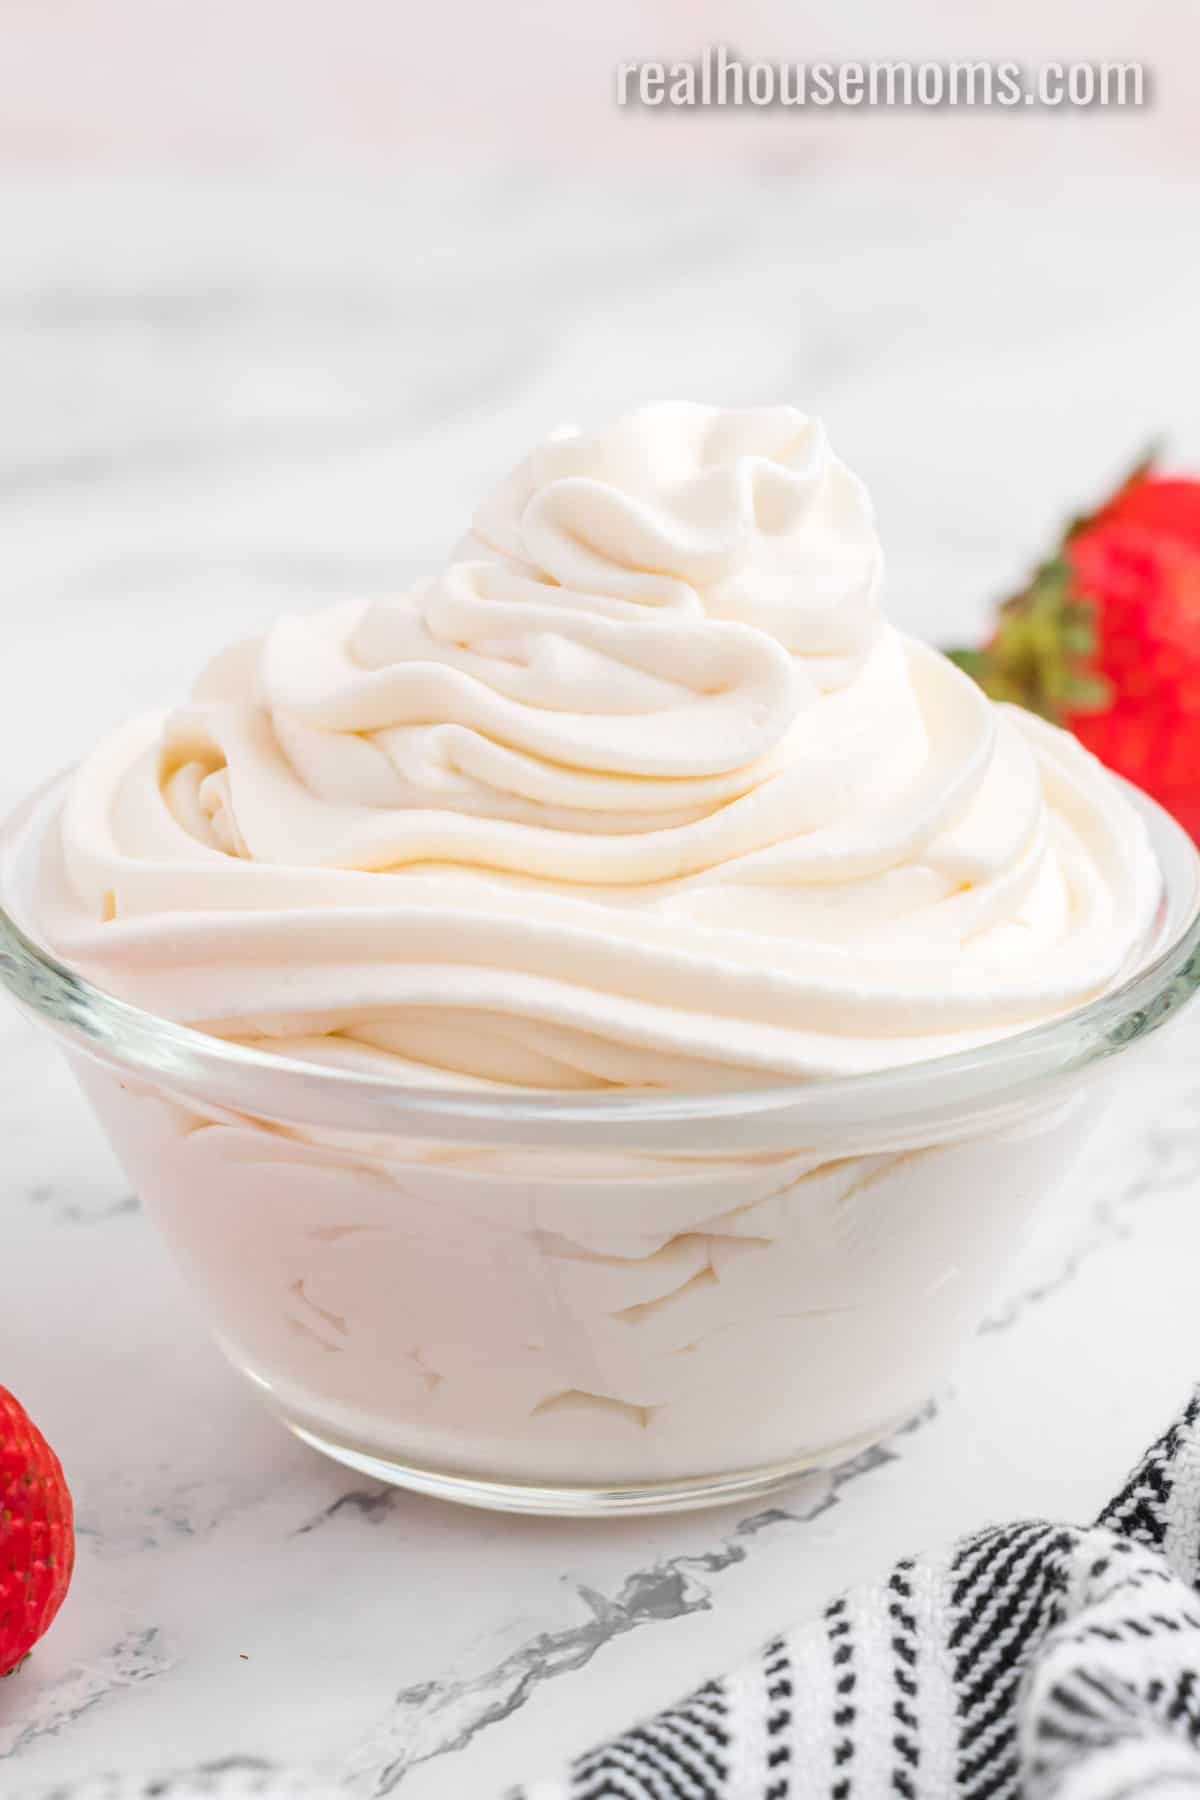 Chantilly Cream Recipe - Simply Home Cooked